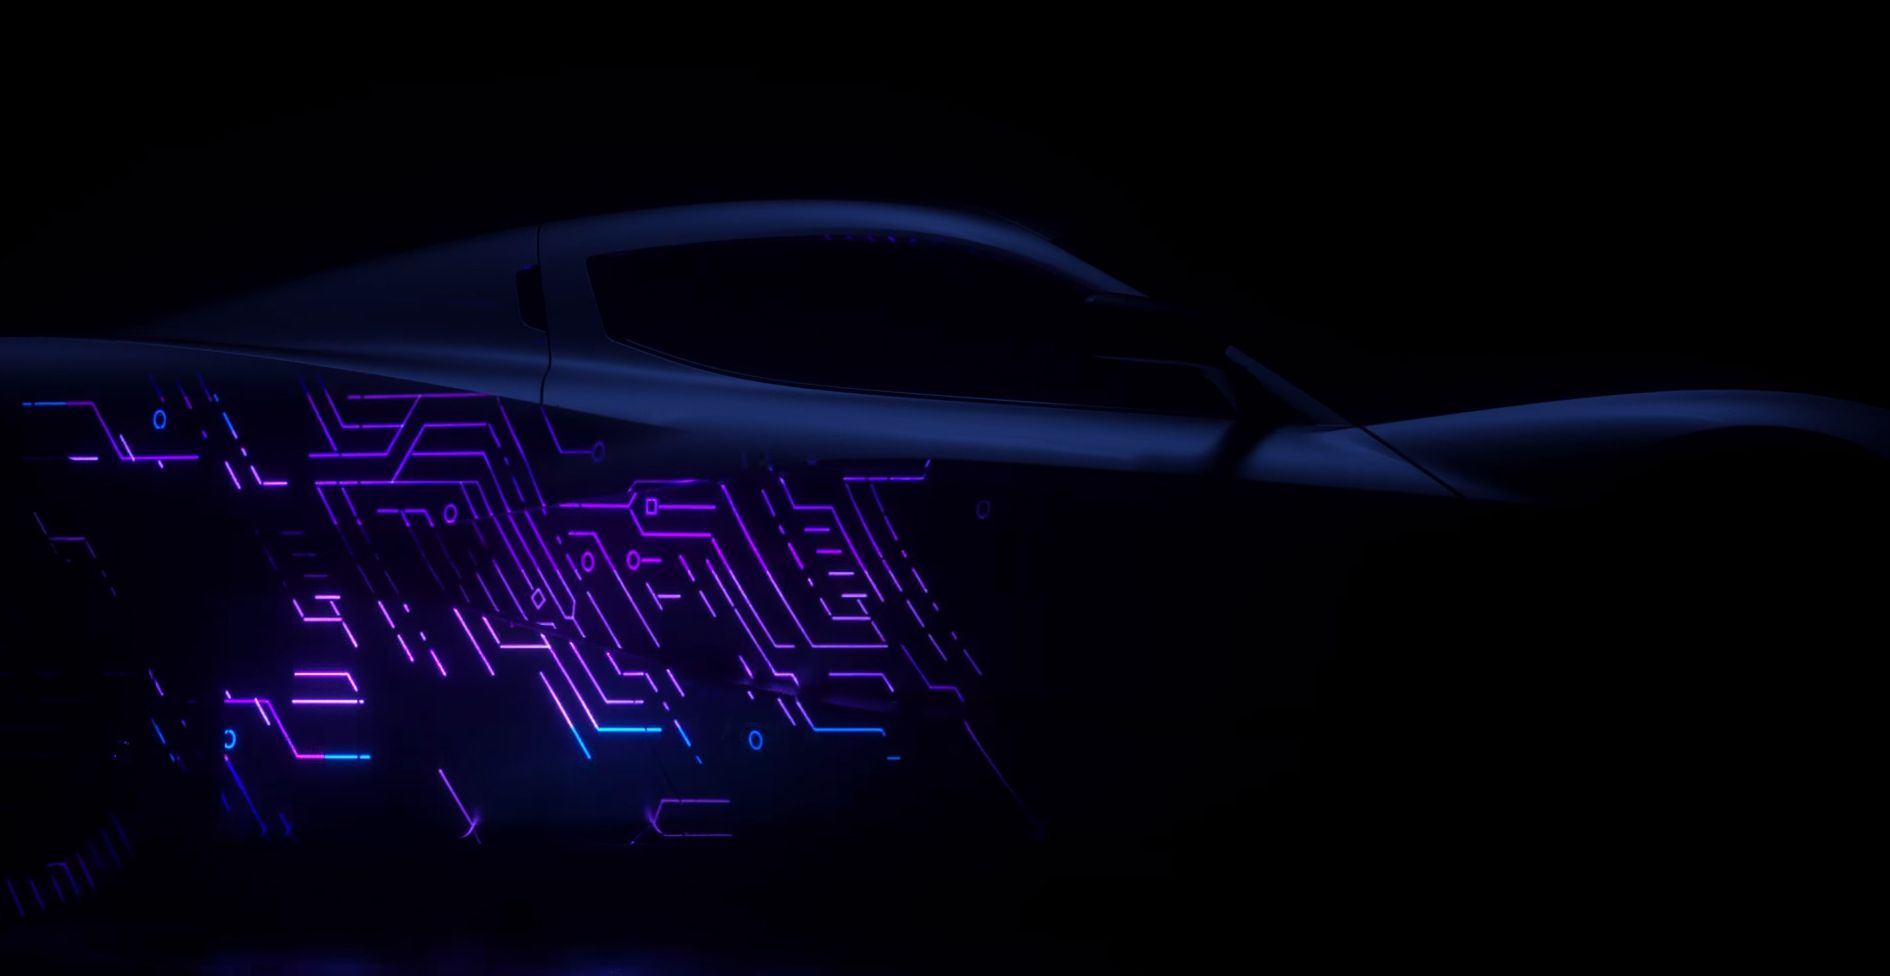 2018 Rimac Shows Its Second-Generation Hypercar In Short Teaser Video